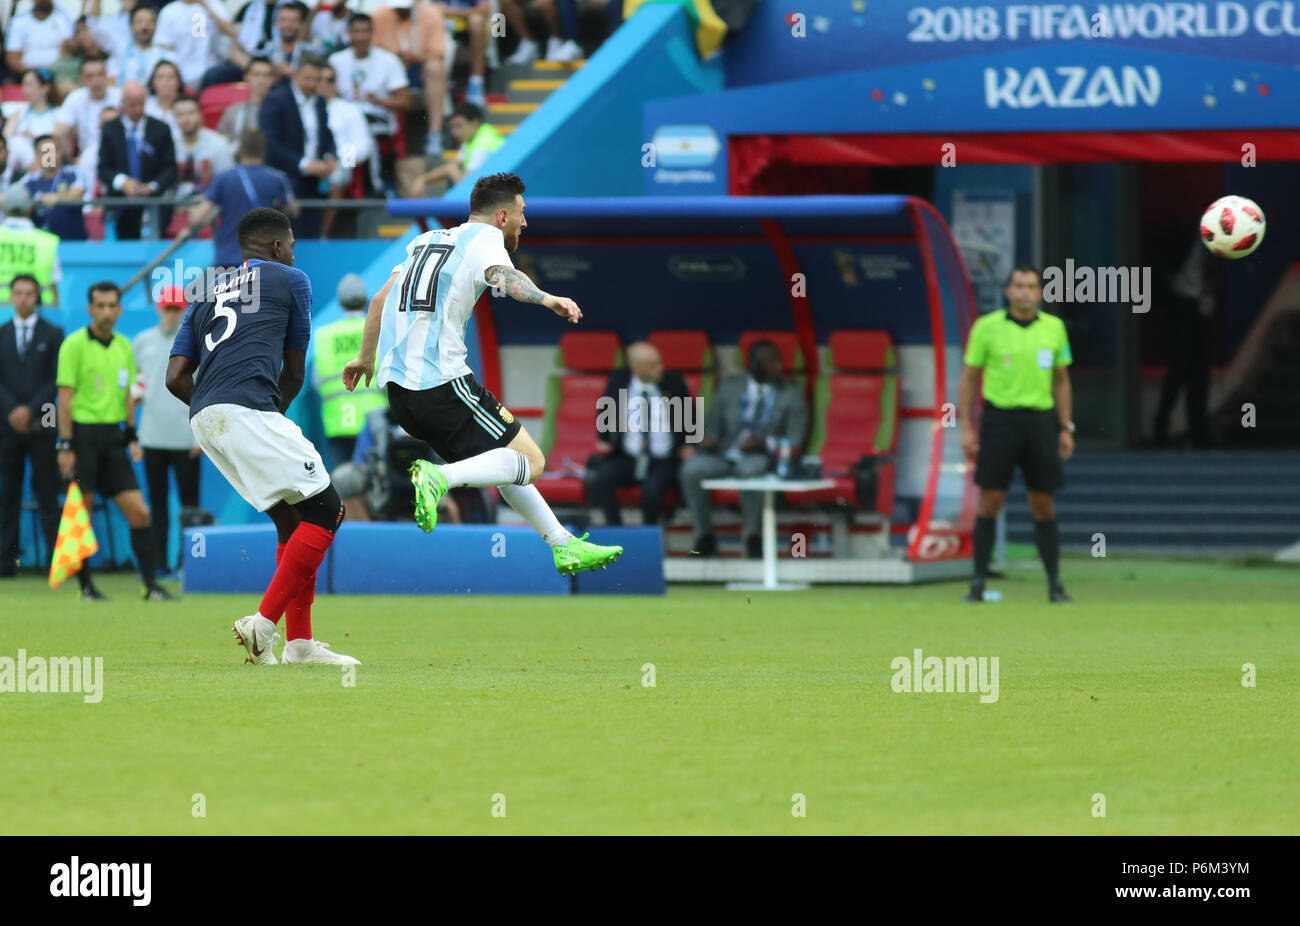 Kazan, Russia, June 30, 2018: Lionel MESSI in action During the first round of 16 were France and Argentina played out a world cup in which France 4 & Argentina 3  Argentina's campaign came to an end as France made a victory by 4-3.   Seshadri SUKUMAR Credit: Seshadri SUKUMAR/Alamy Live News Stock Photo